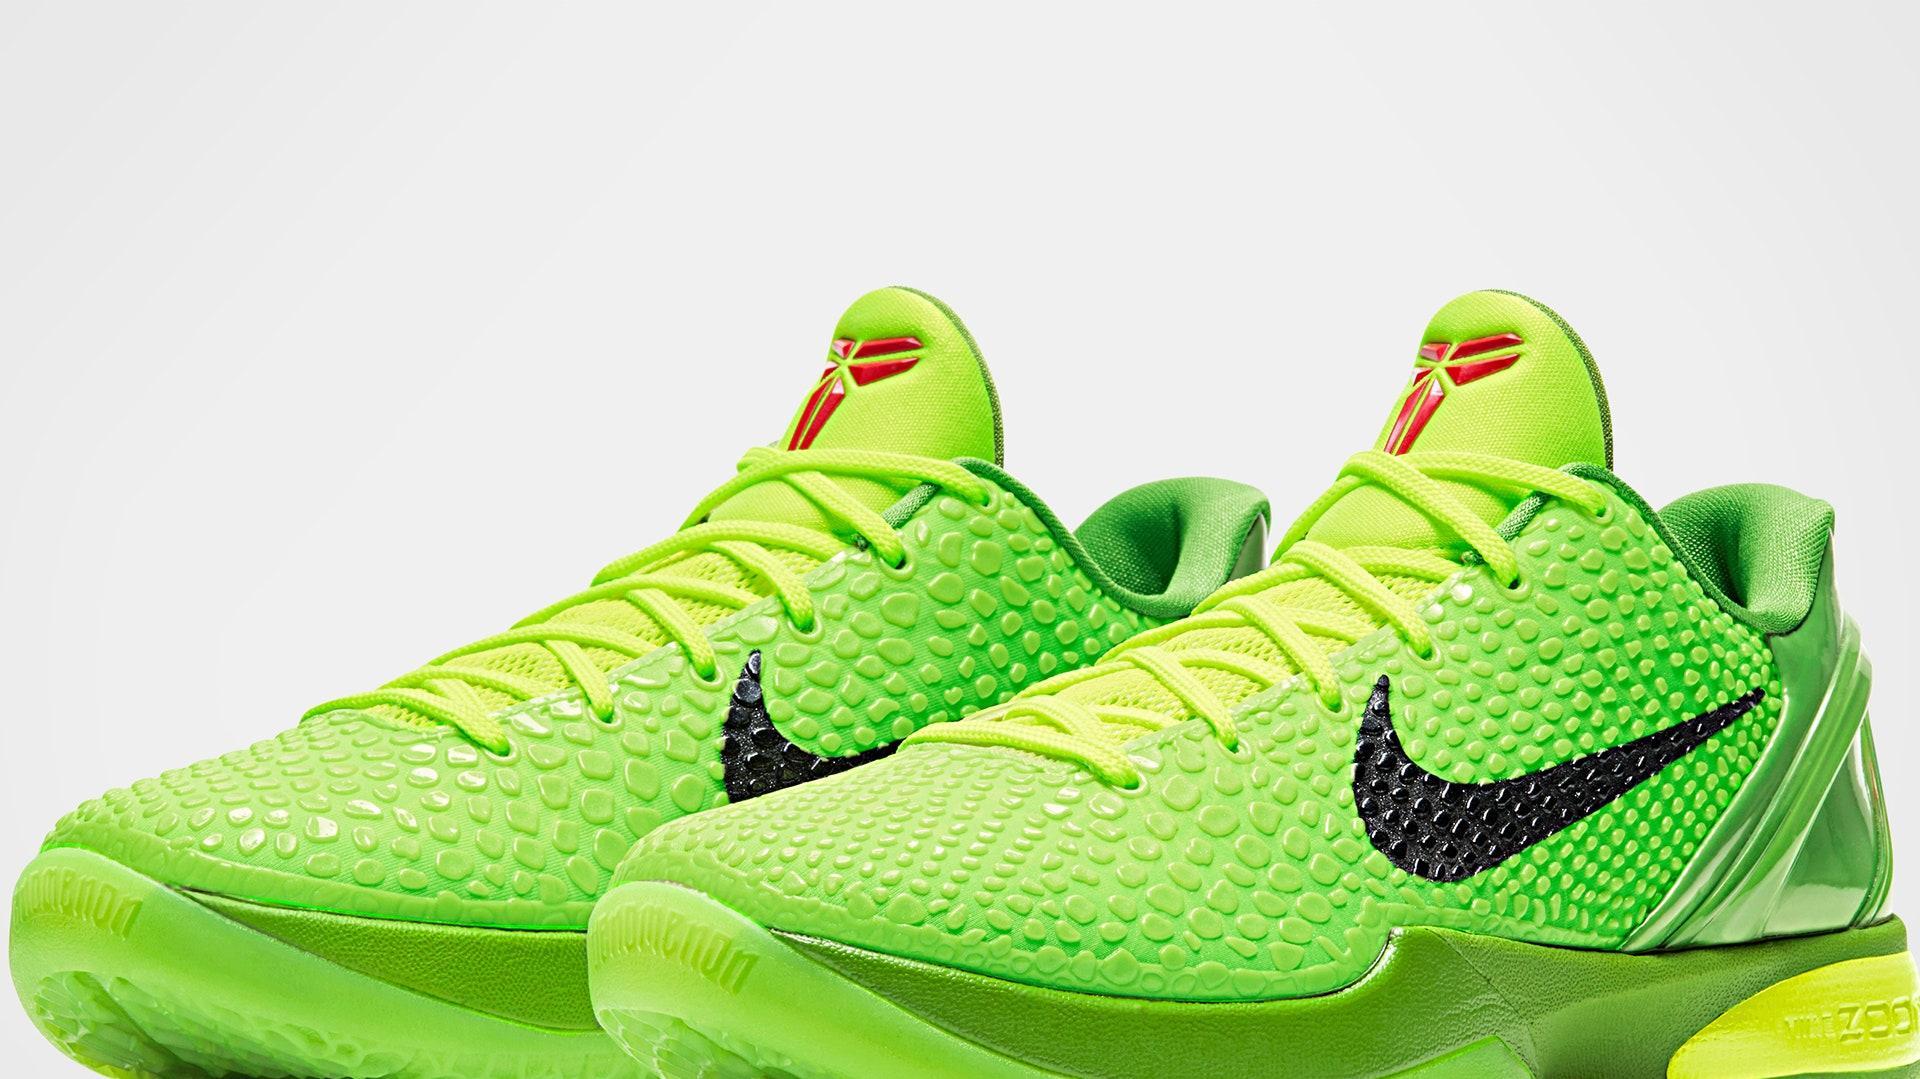 The Nike Kobe Protro Grinch Are Trainers We Want For